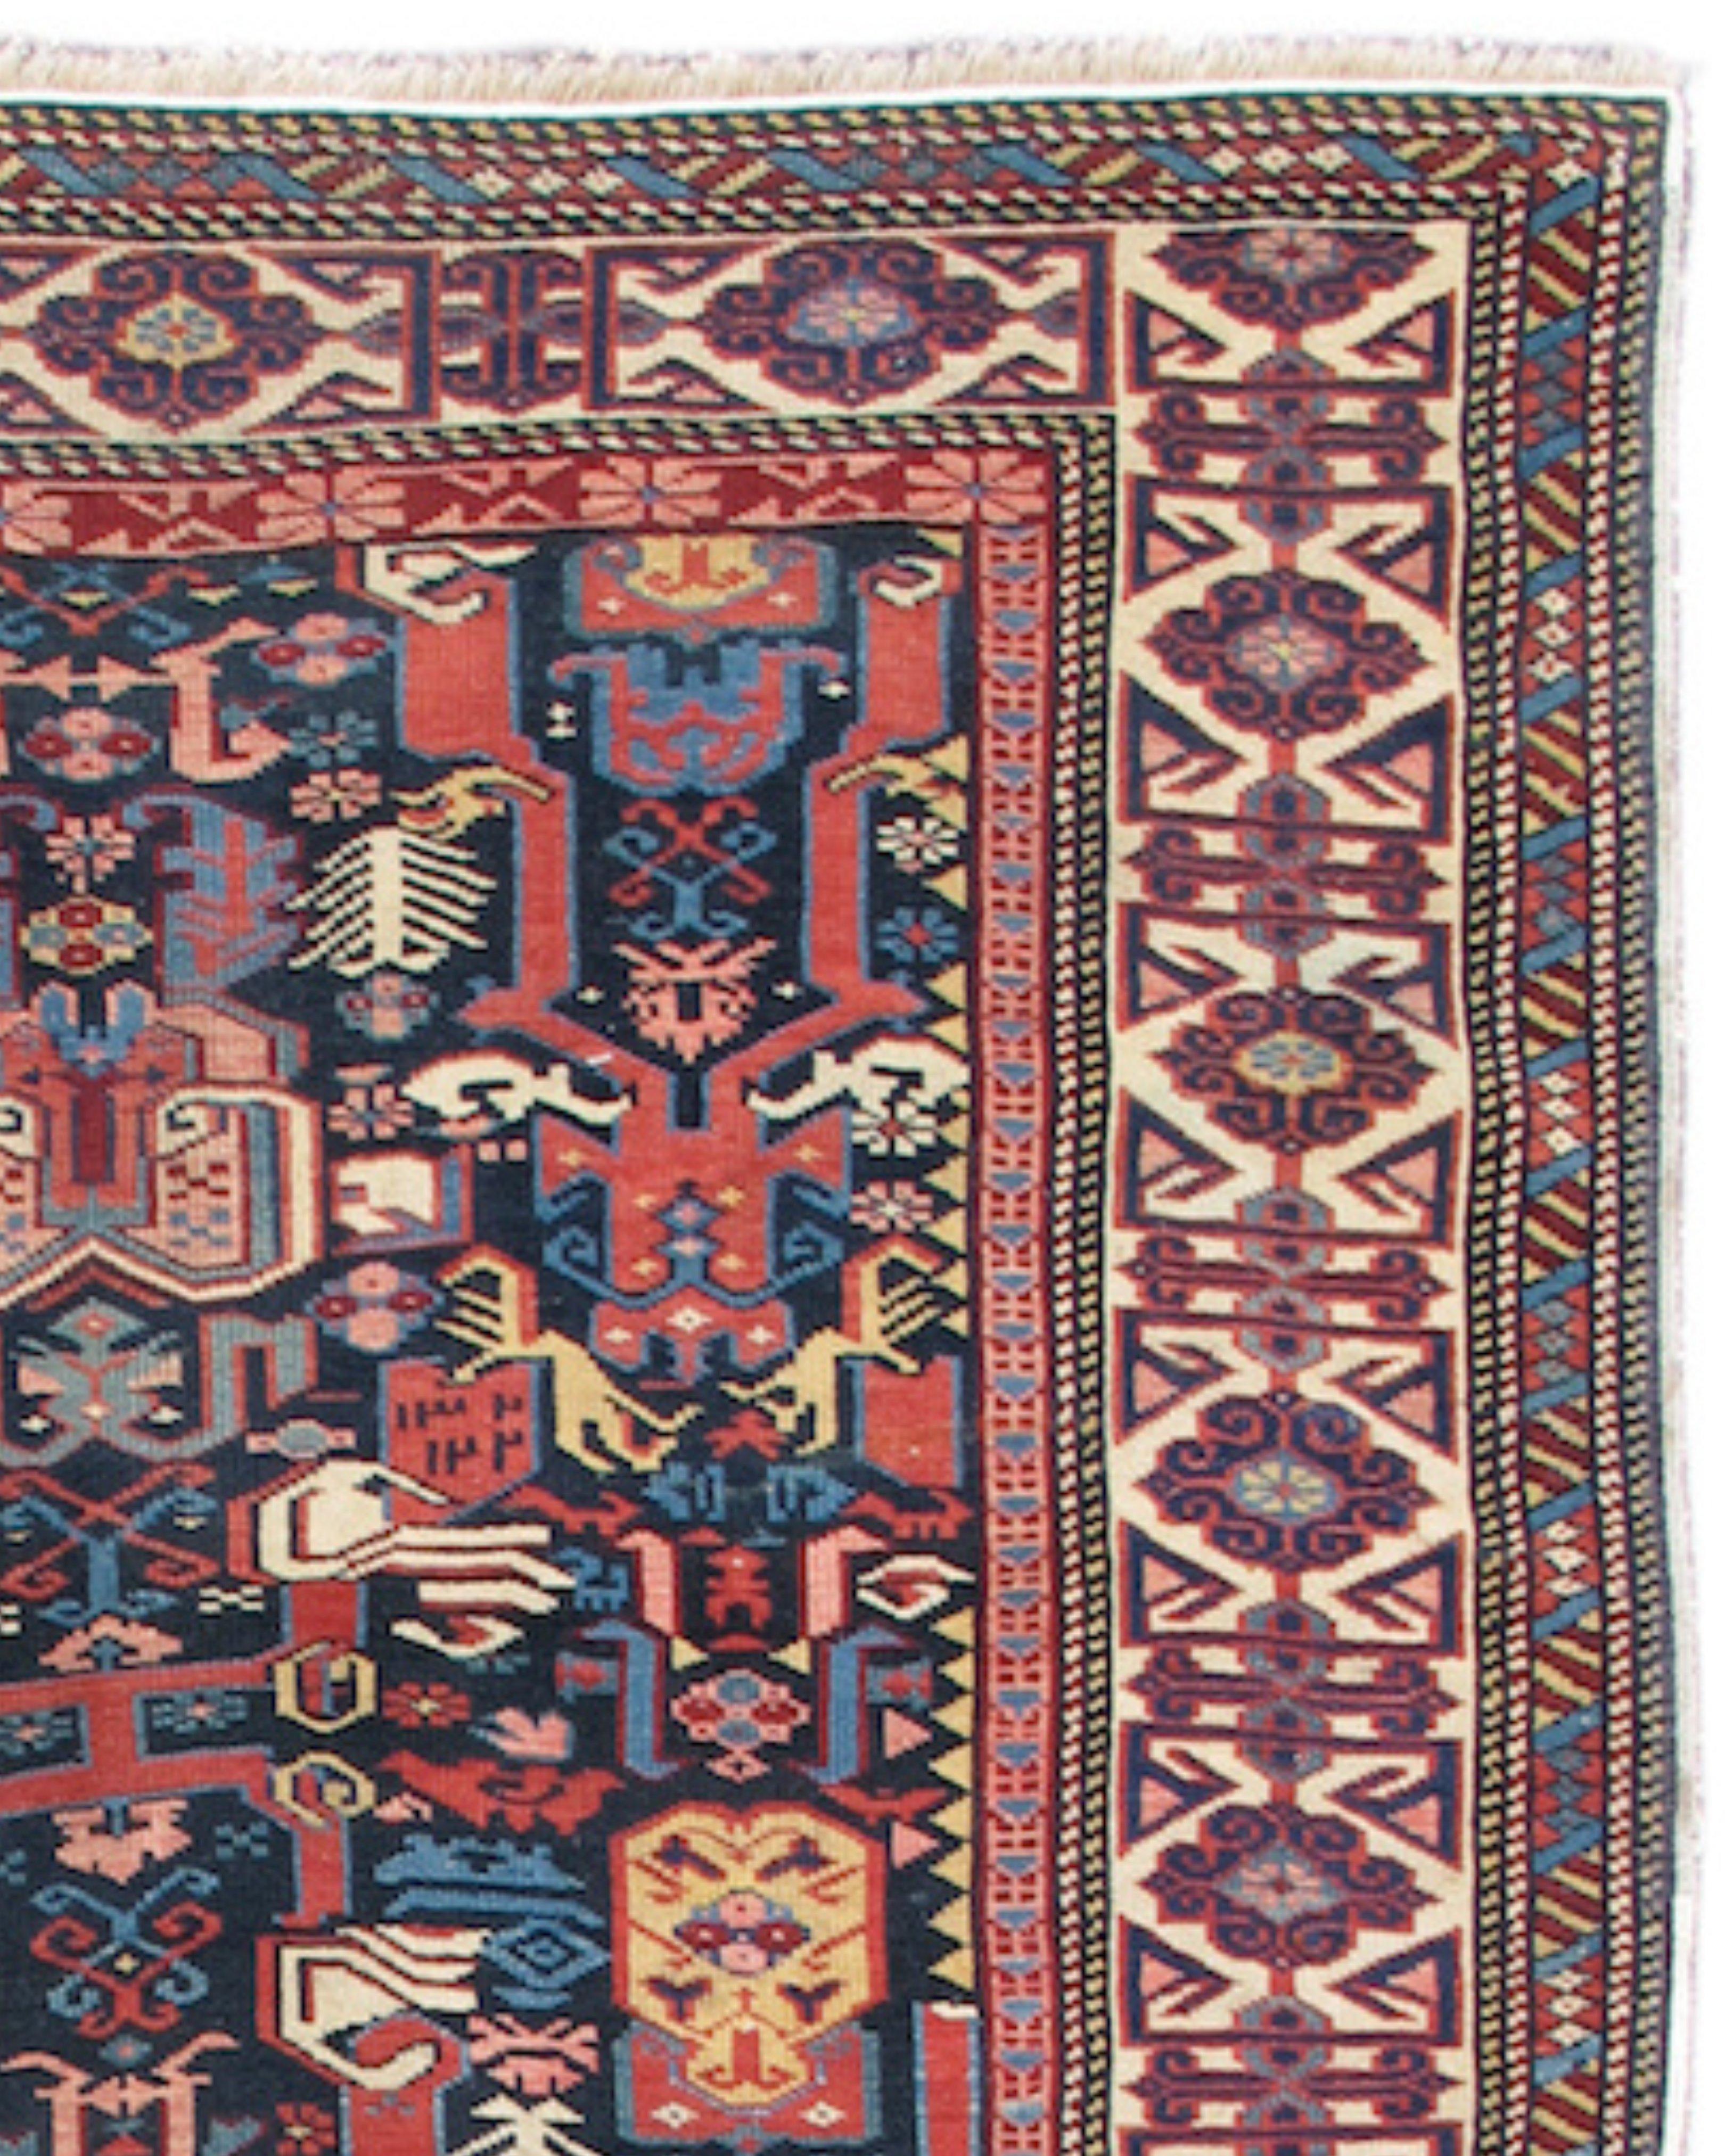 Antique Kuba Rug, c. 1900 In Excellent Condition For Sale In San Francisco, CA